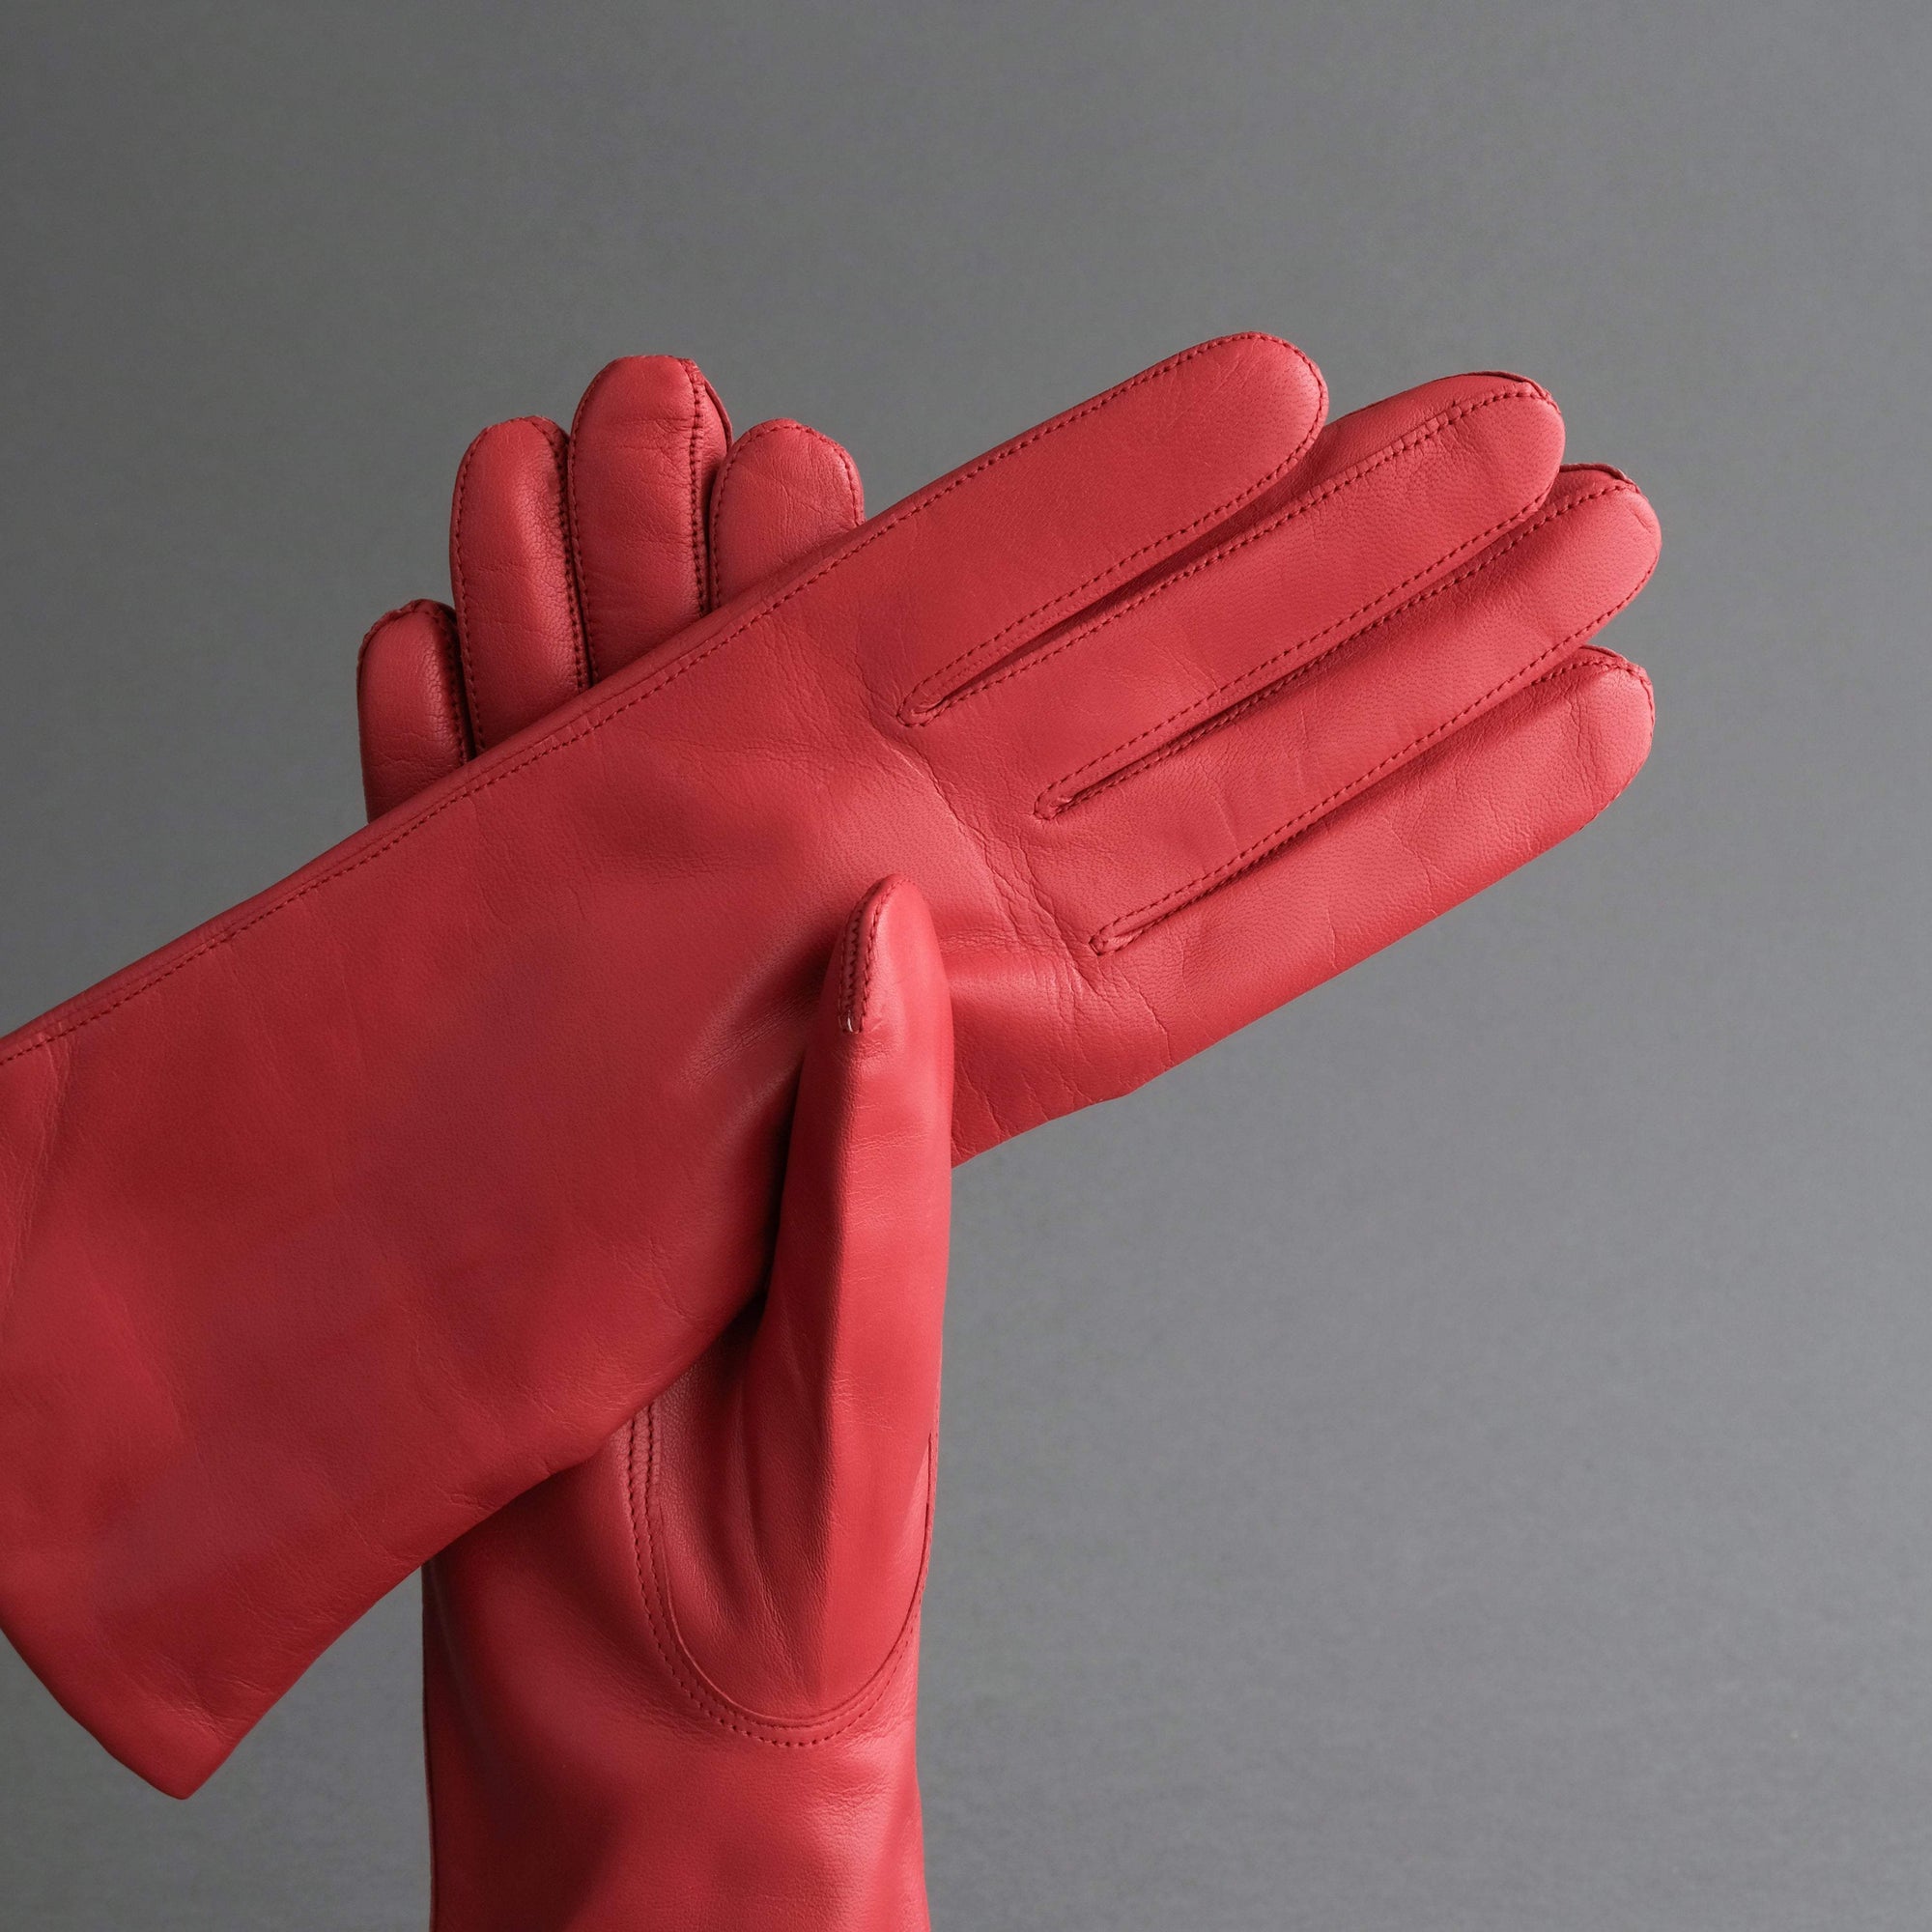 Ladies Gloves from Hair Sheep Nappa Lined with Cashmere - TR Handschuhe Wien - Thomas Riemer Handmade Gloves